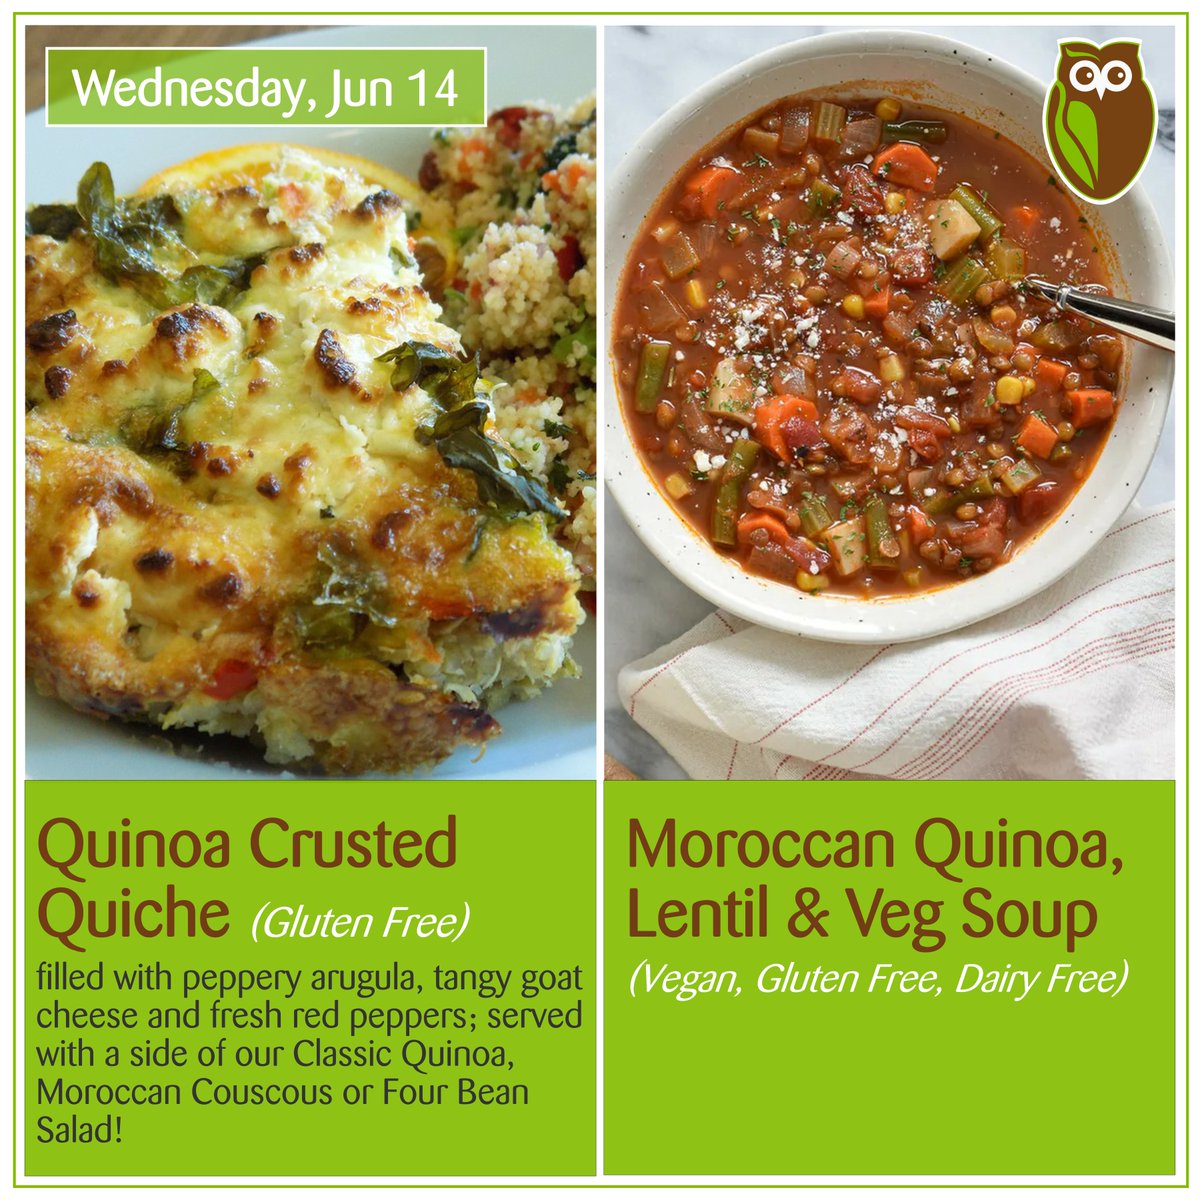 Our Daily Soup and Feature for Wednesday. #realfood #glutenfree #dairyfree #kwvegan #kwvegetarian #kwawesome #wrawesome